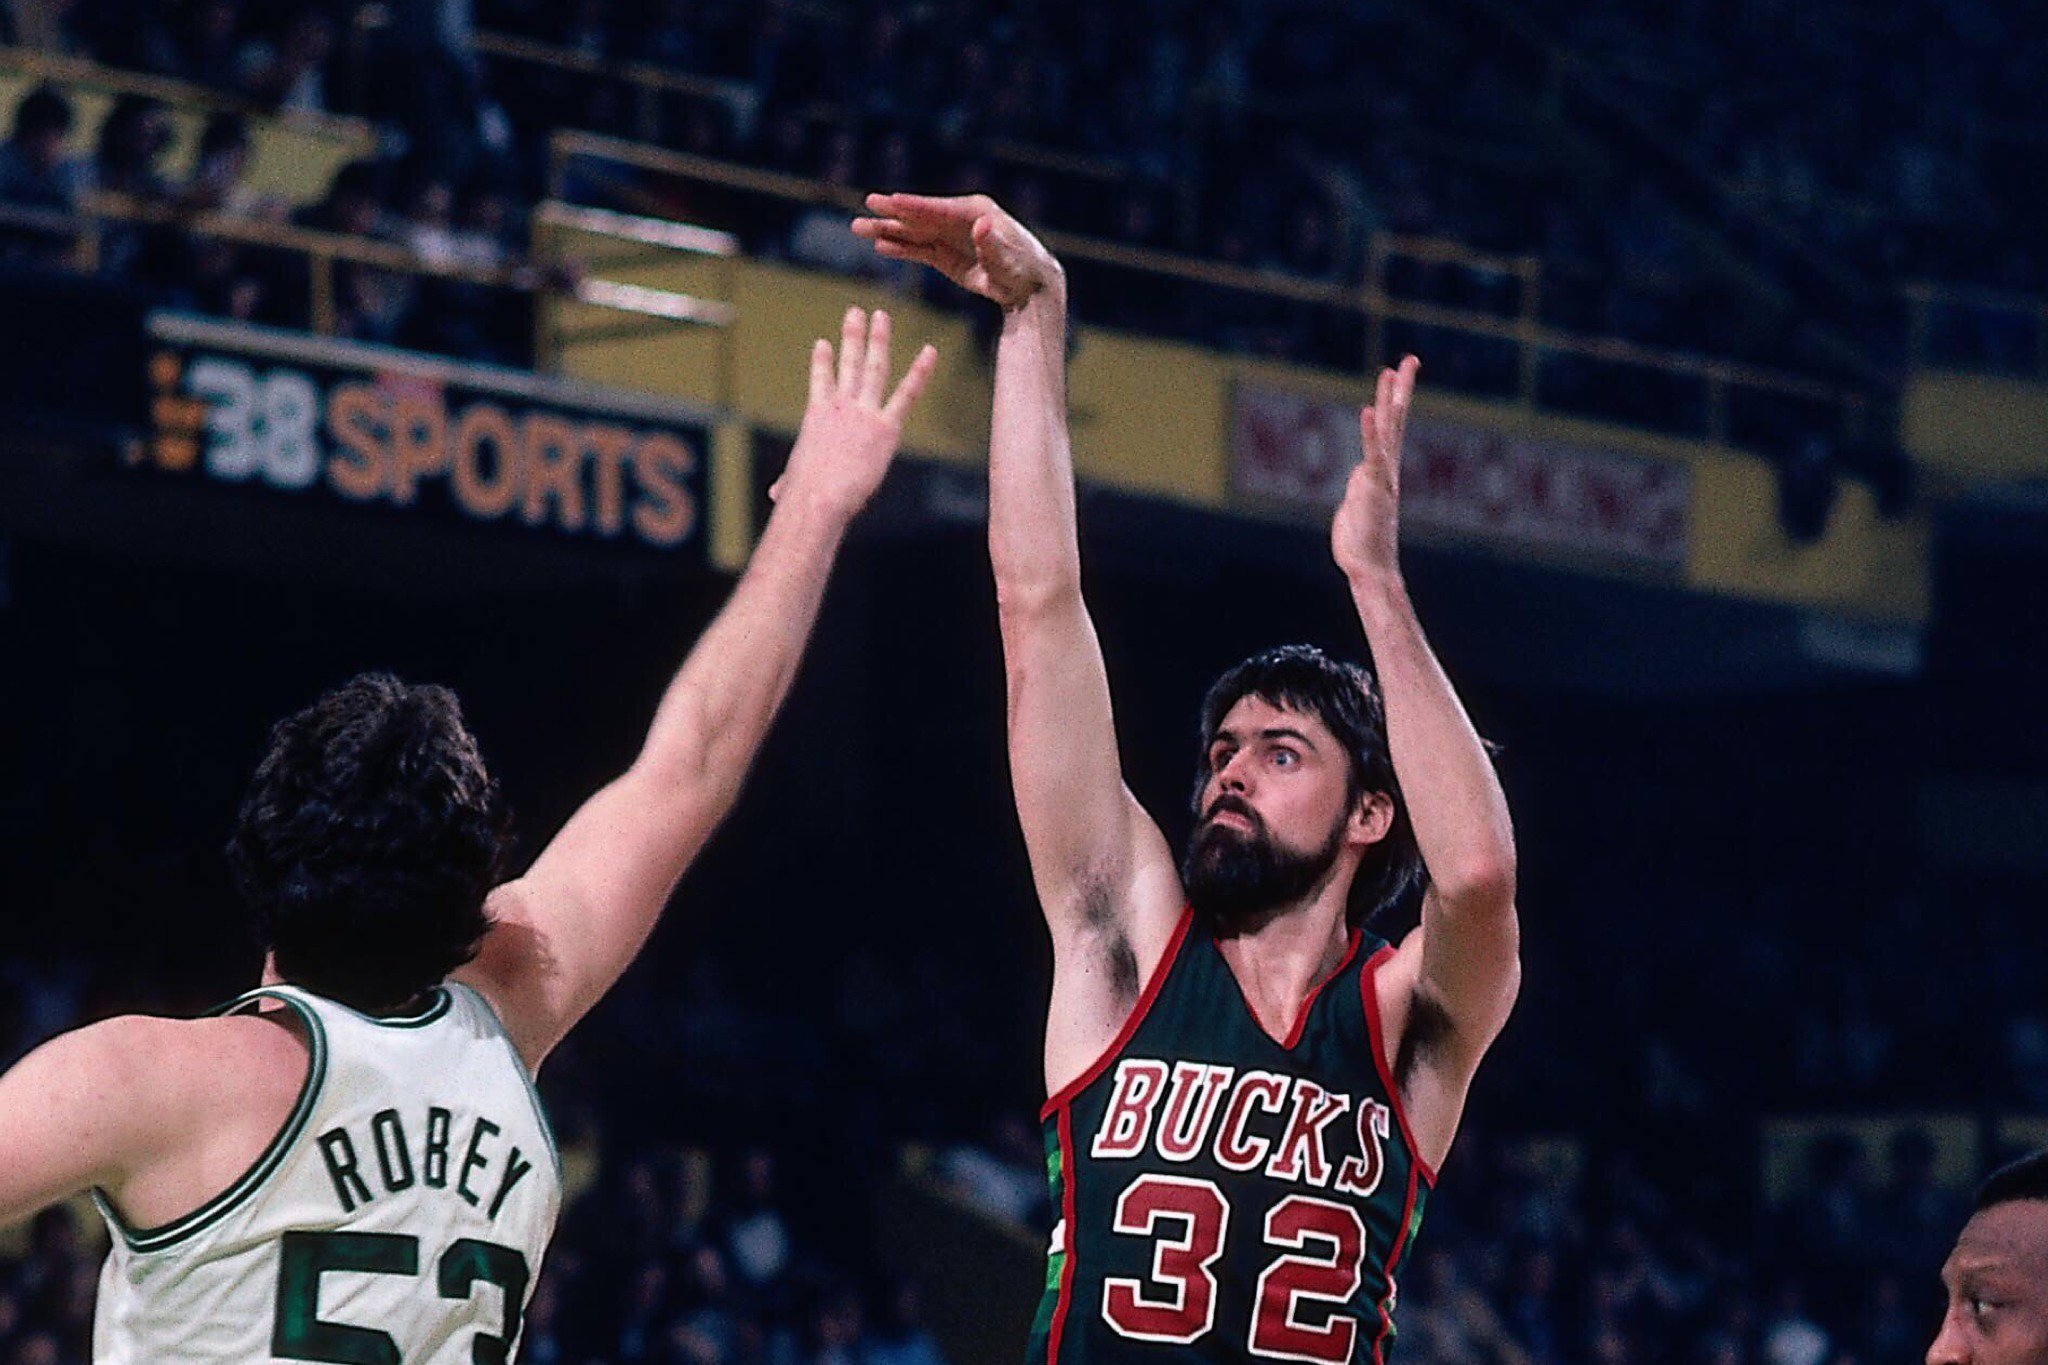 Milwaukee Bucks on X: "Brian Winters became an All-Star for the first time  in 1975-76 after just 2 years in the league!! 50 Best Player Seasons »  https://t.co/nbp4aq1Tfw https://t.co/hMJNi31SDC" / X